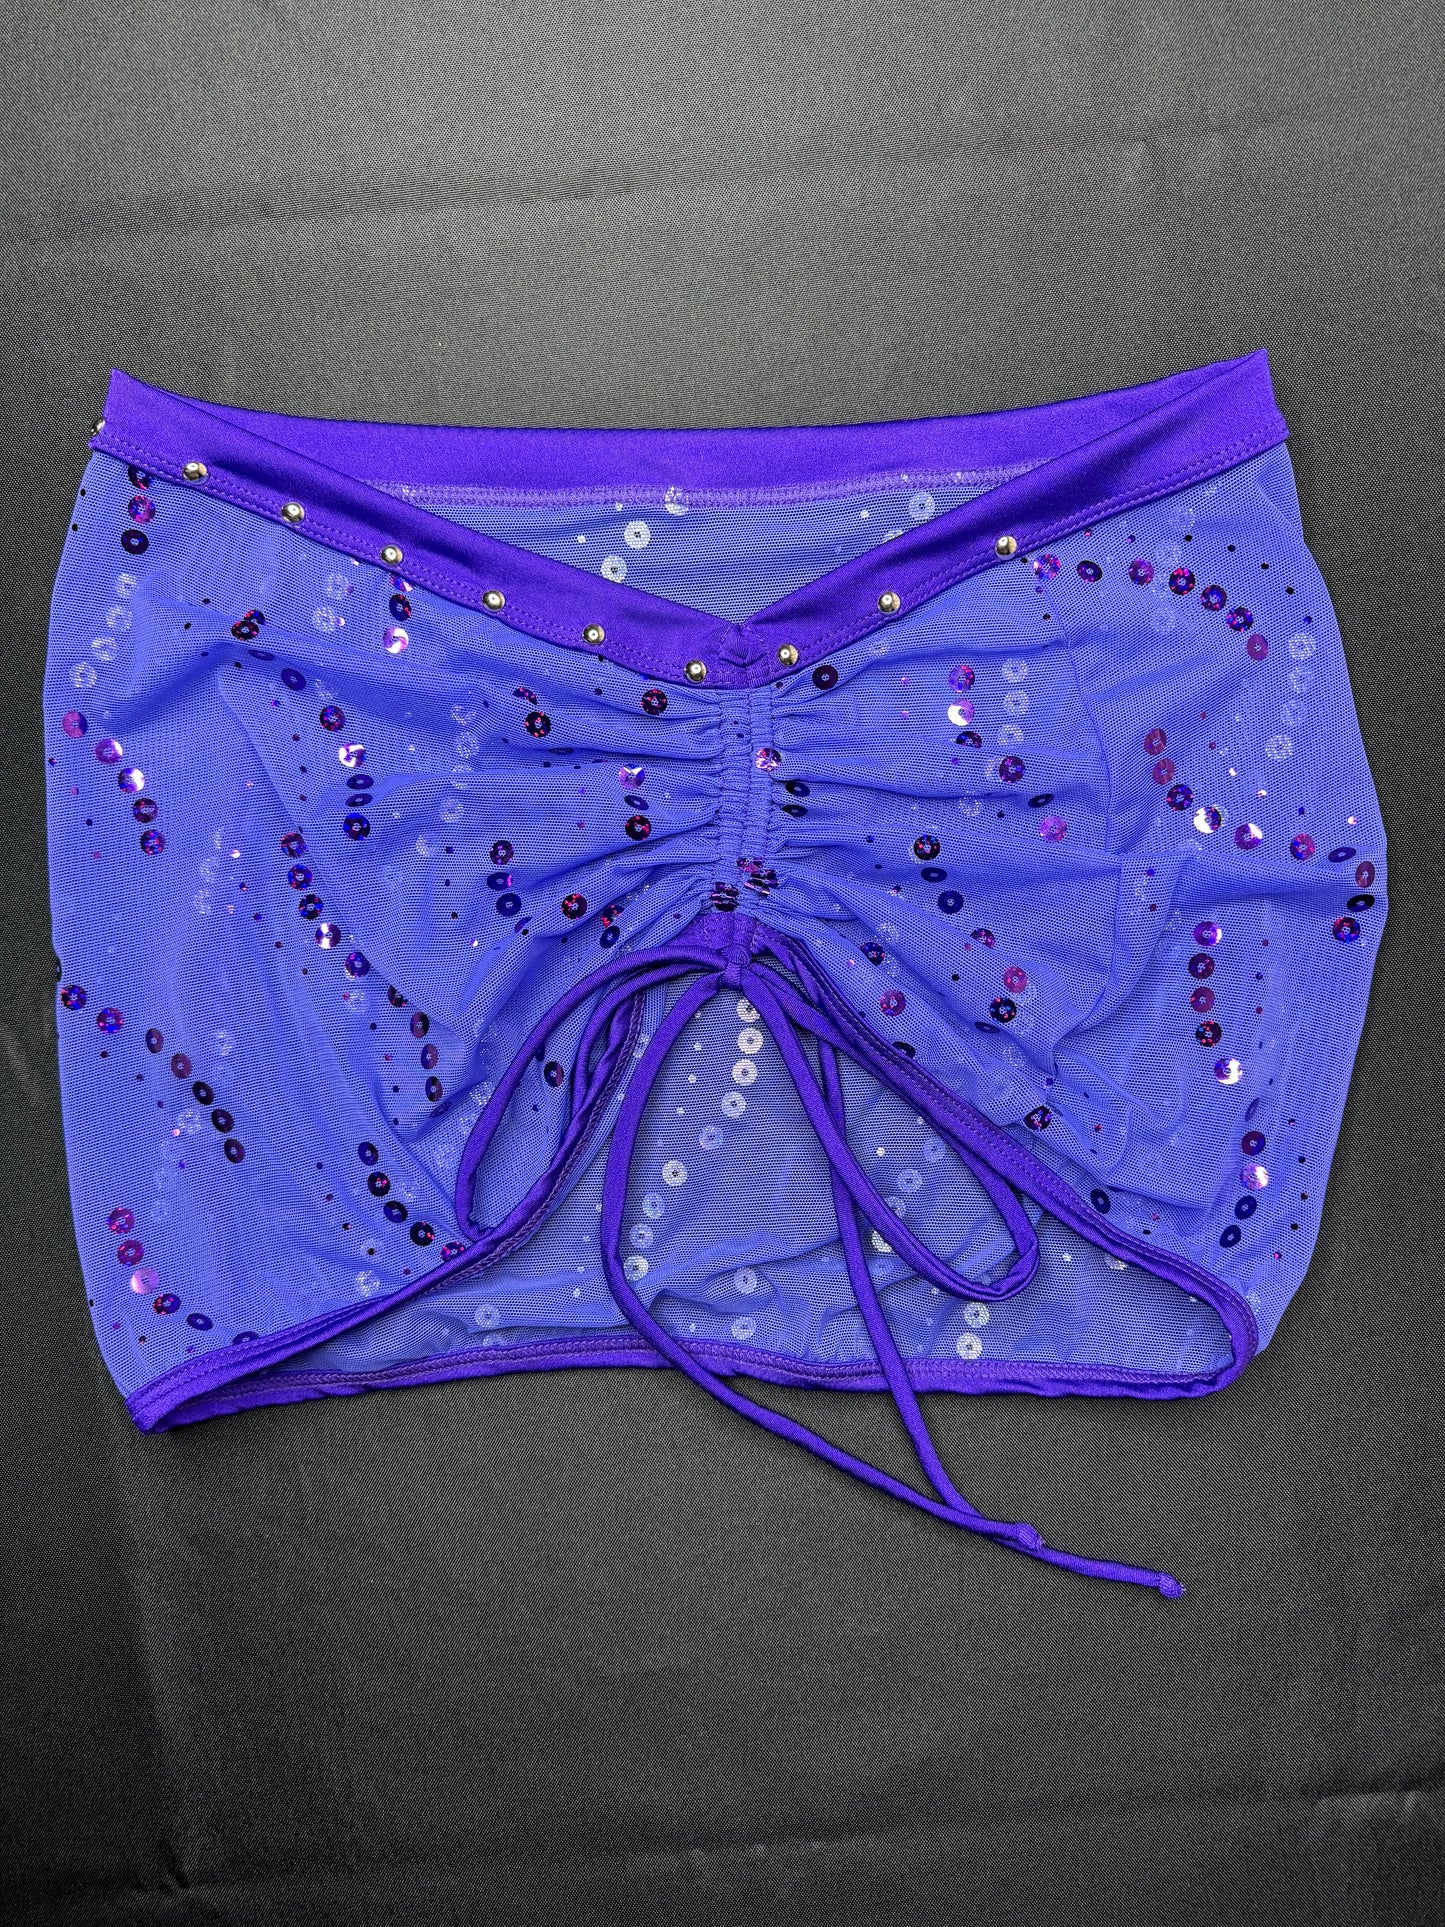 Three-Piece Purple Mesh Sling-Shot Skirt Lingerie Outfit